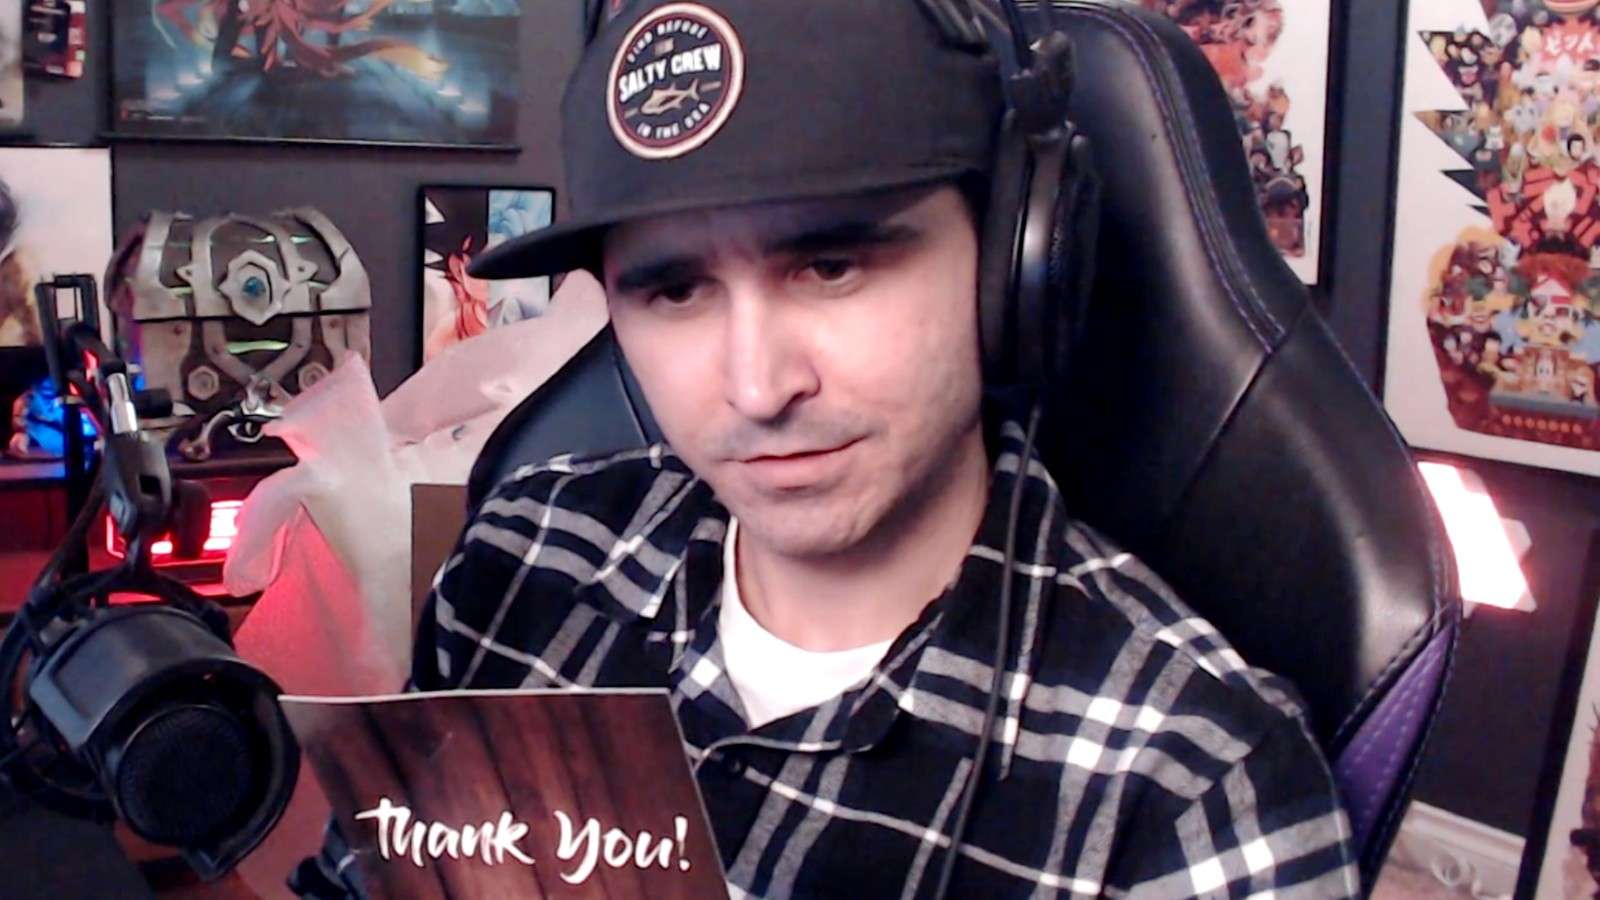 Summit1g reads a thank you card from Twitch